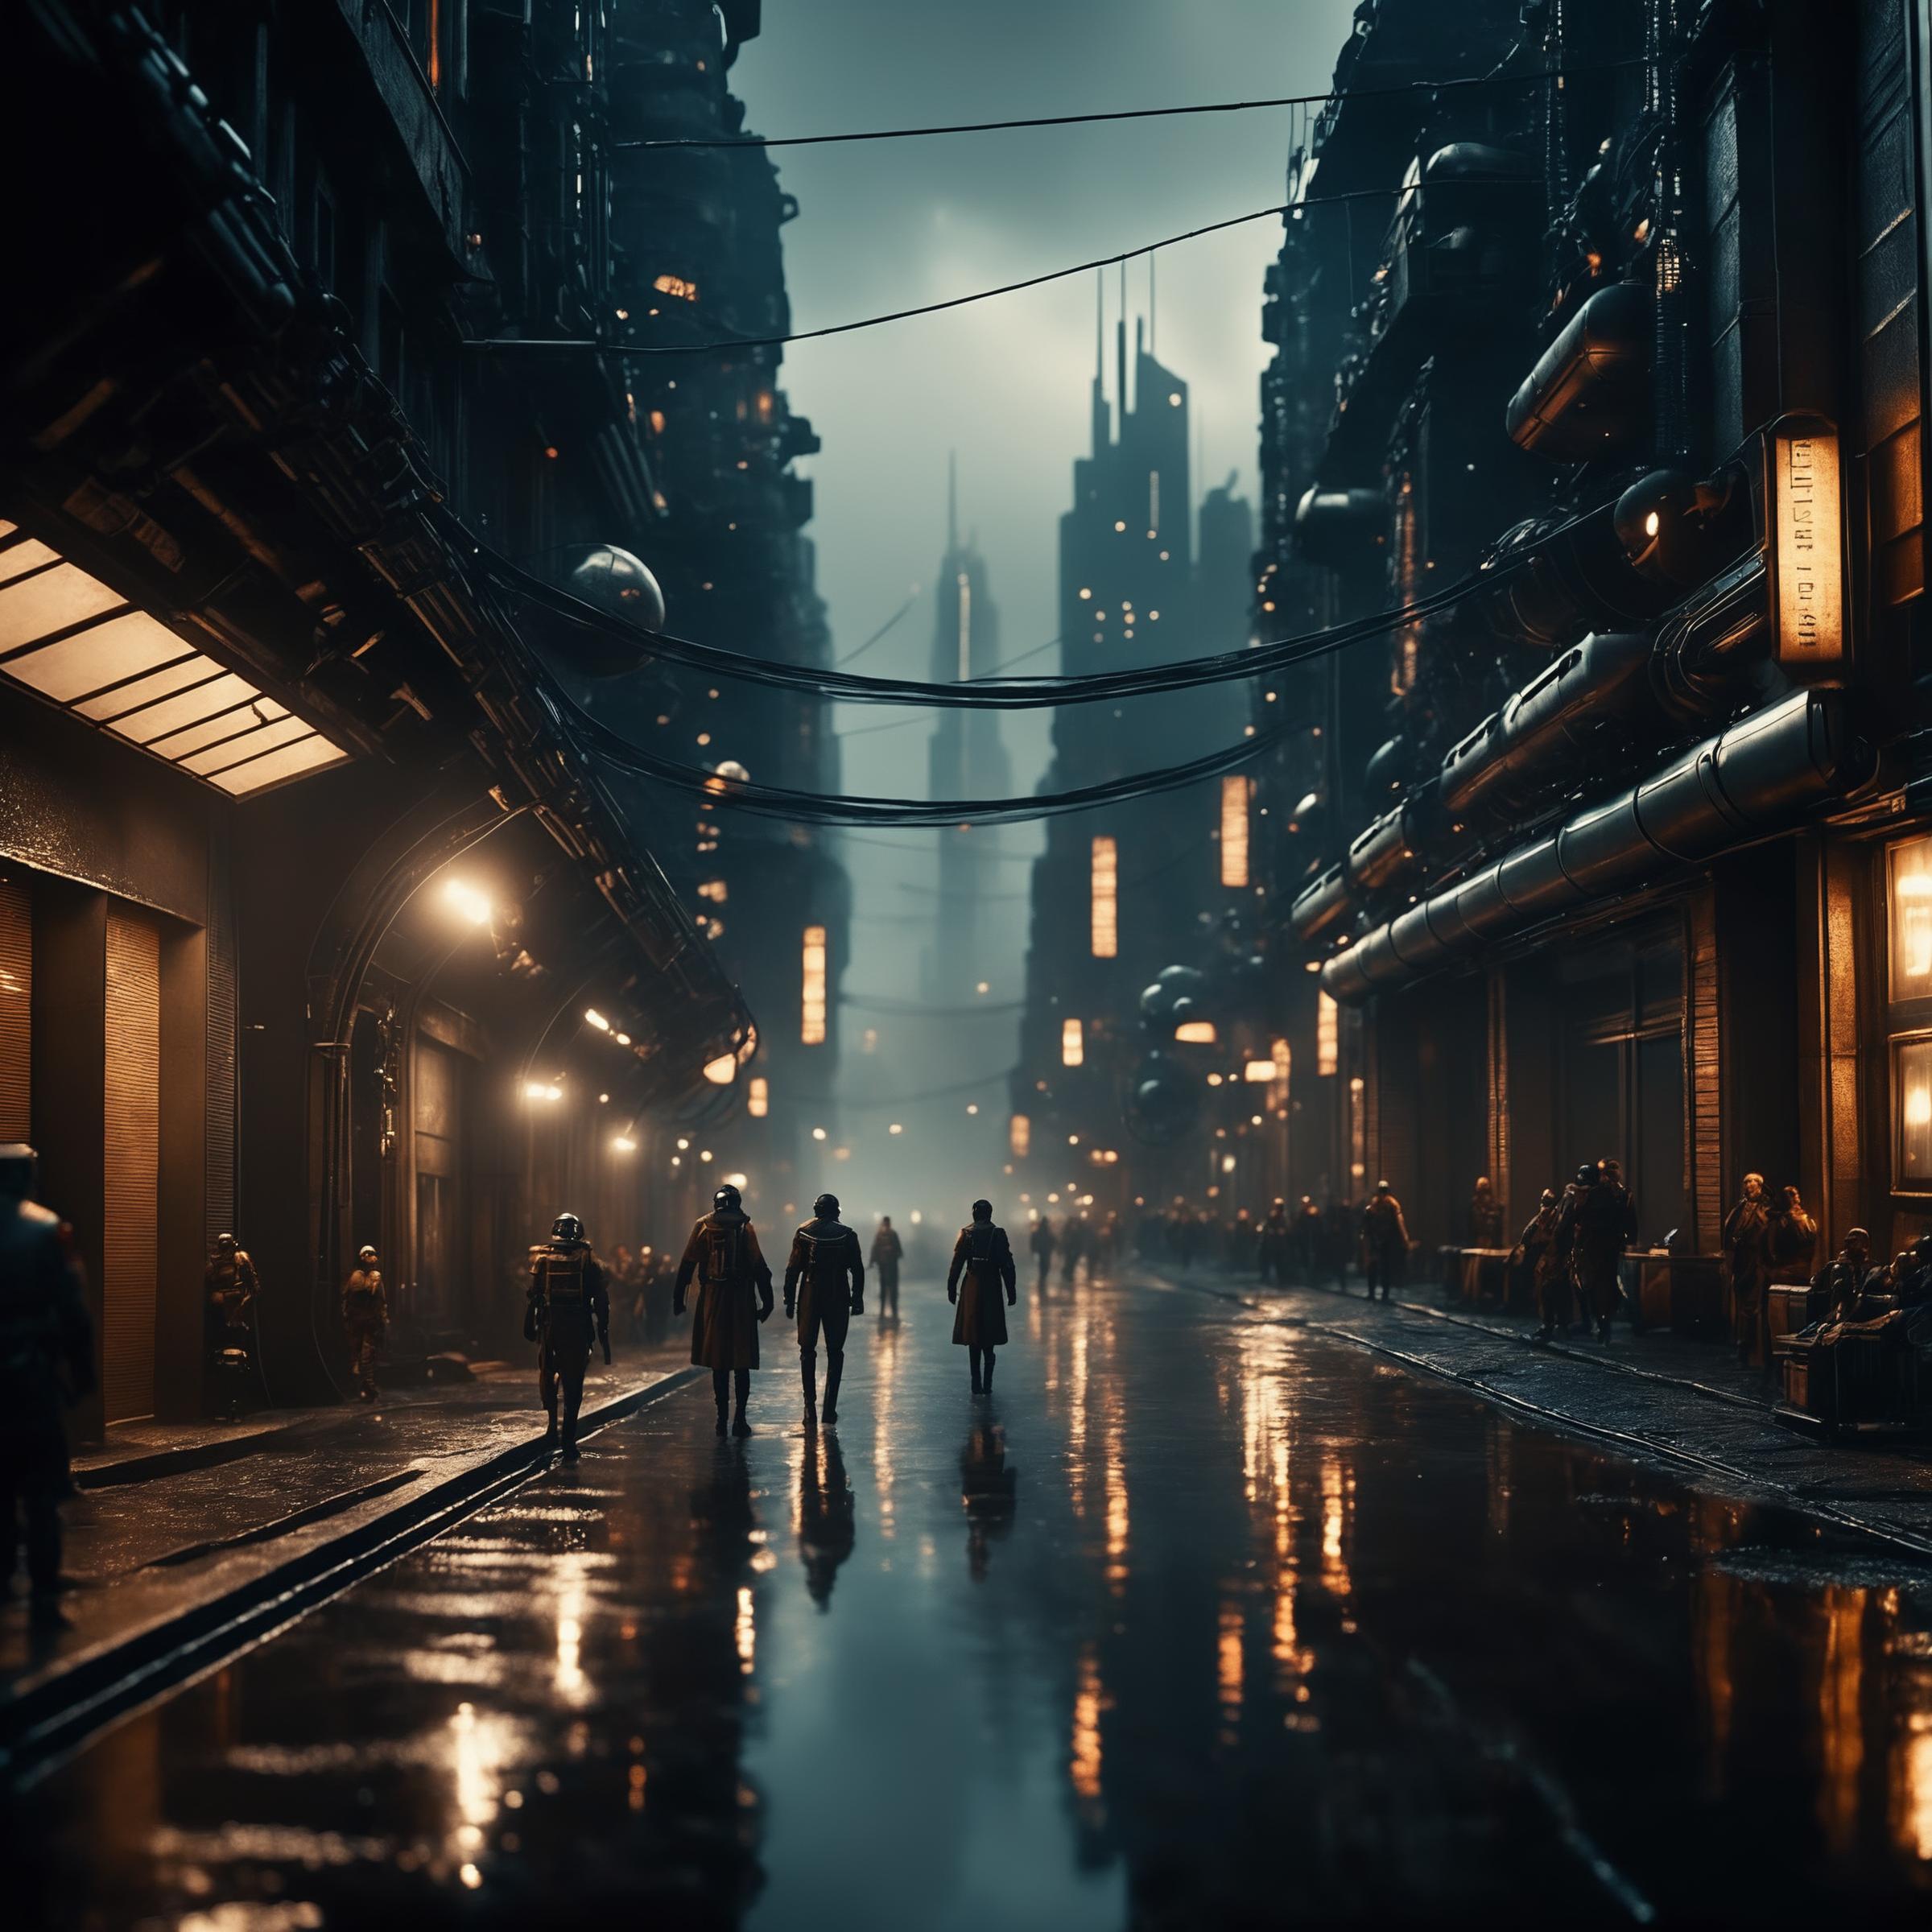 cinematic film still, a city, a dystopian future, year 3000, sci fi, amazing details, dark atmosphere, shallow depth of fi...